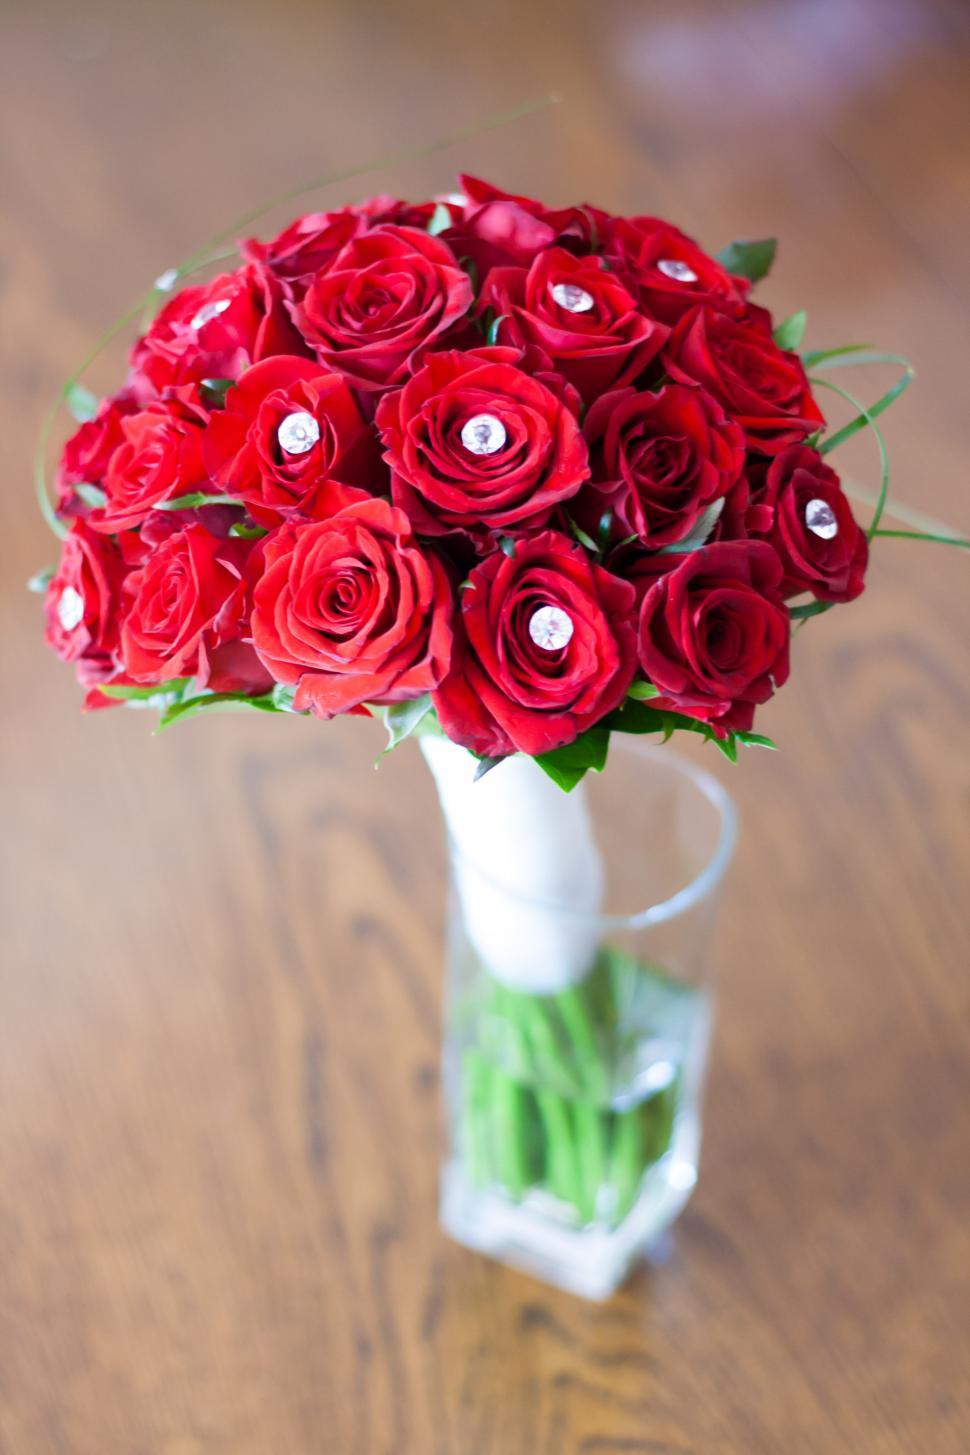 Free Image of A Bouquet of Red Roses in a Vase on a Table 